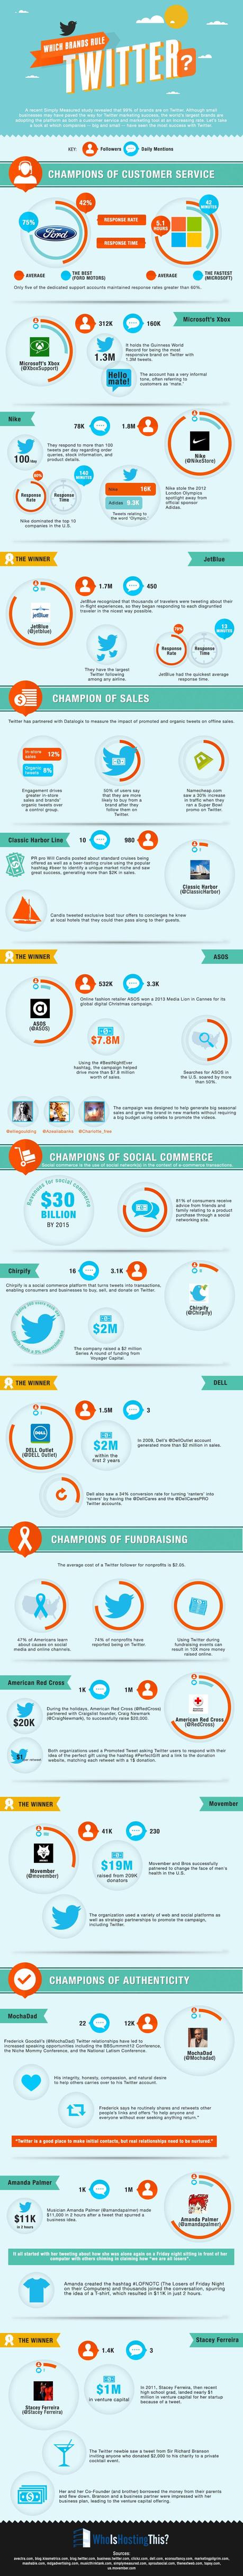 Using Twitter to Get Ahead: Which Brand Rule Twitter? [Infographics]